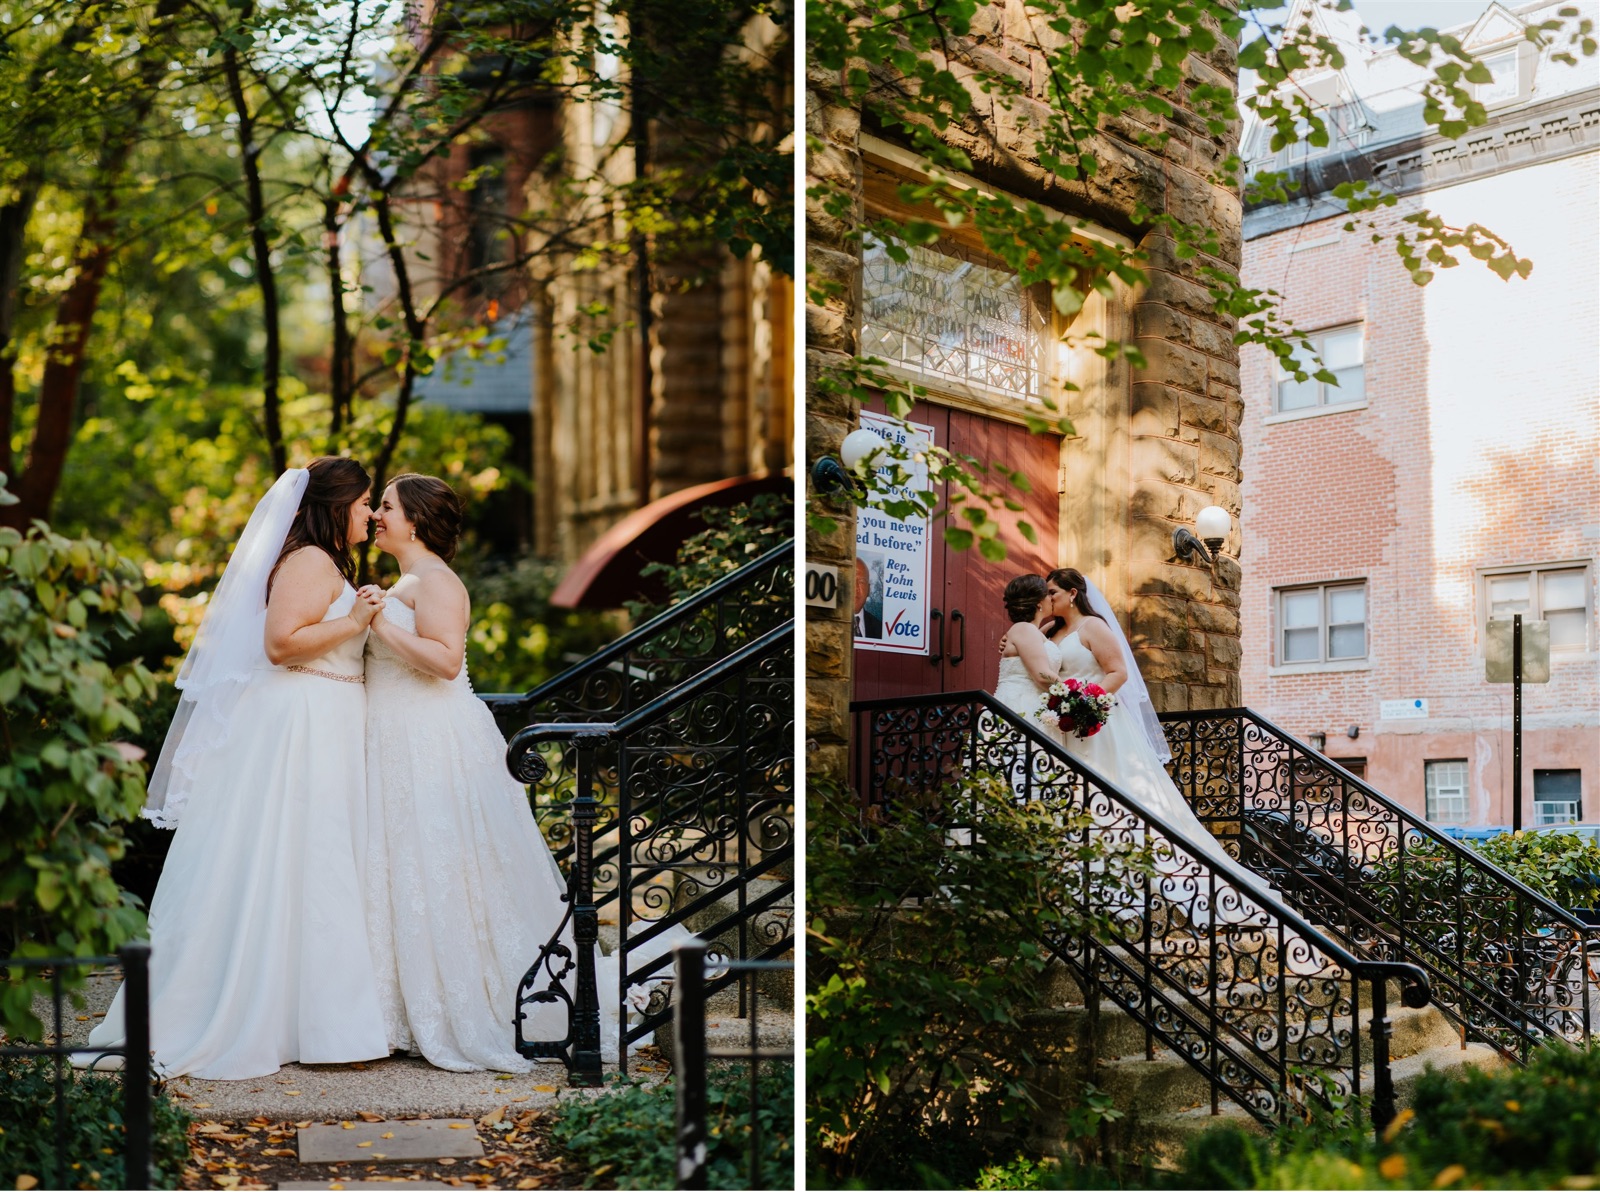 Bridal Portraits in Downtown Chicago